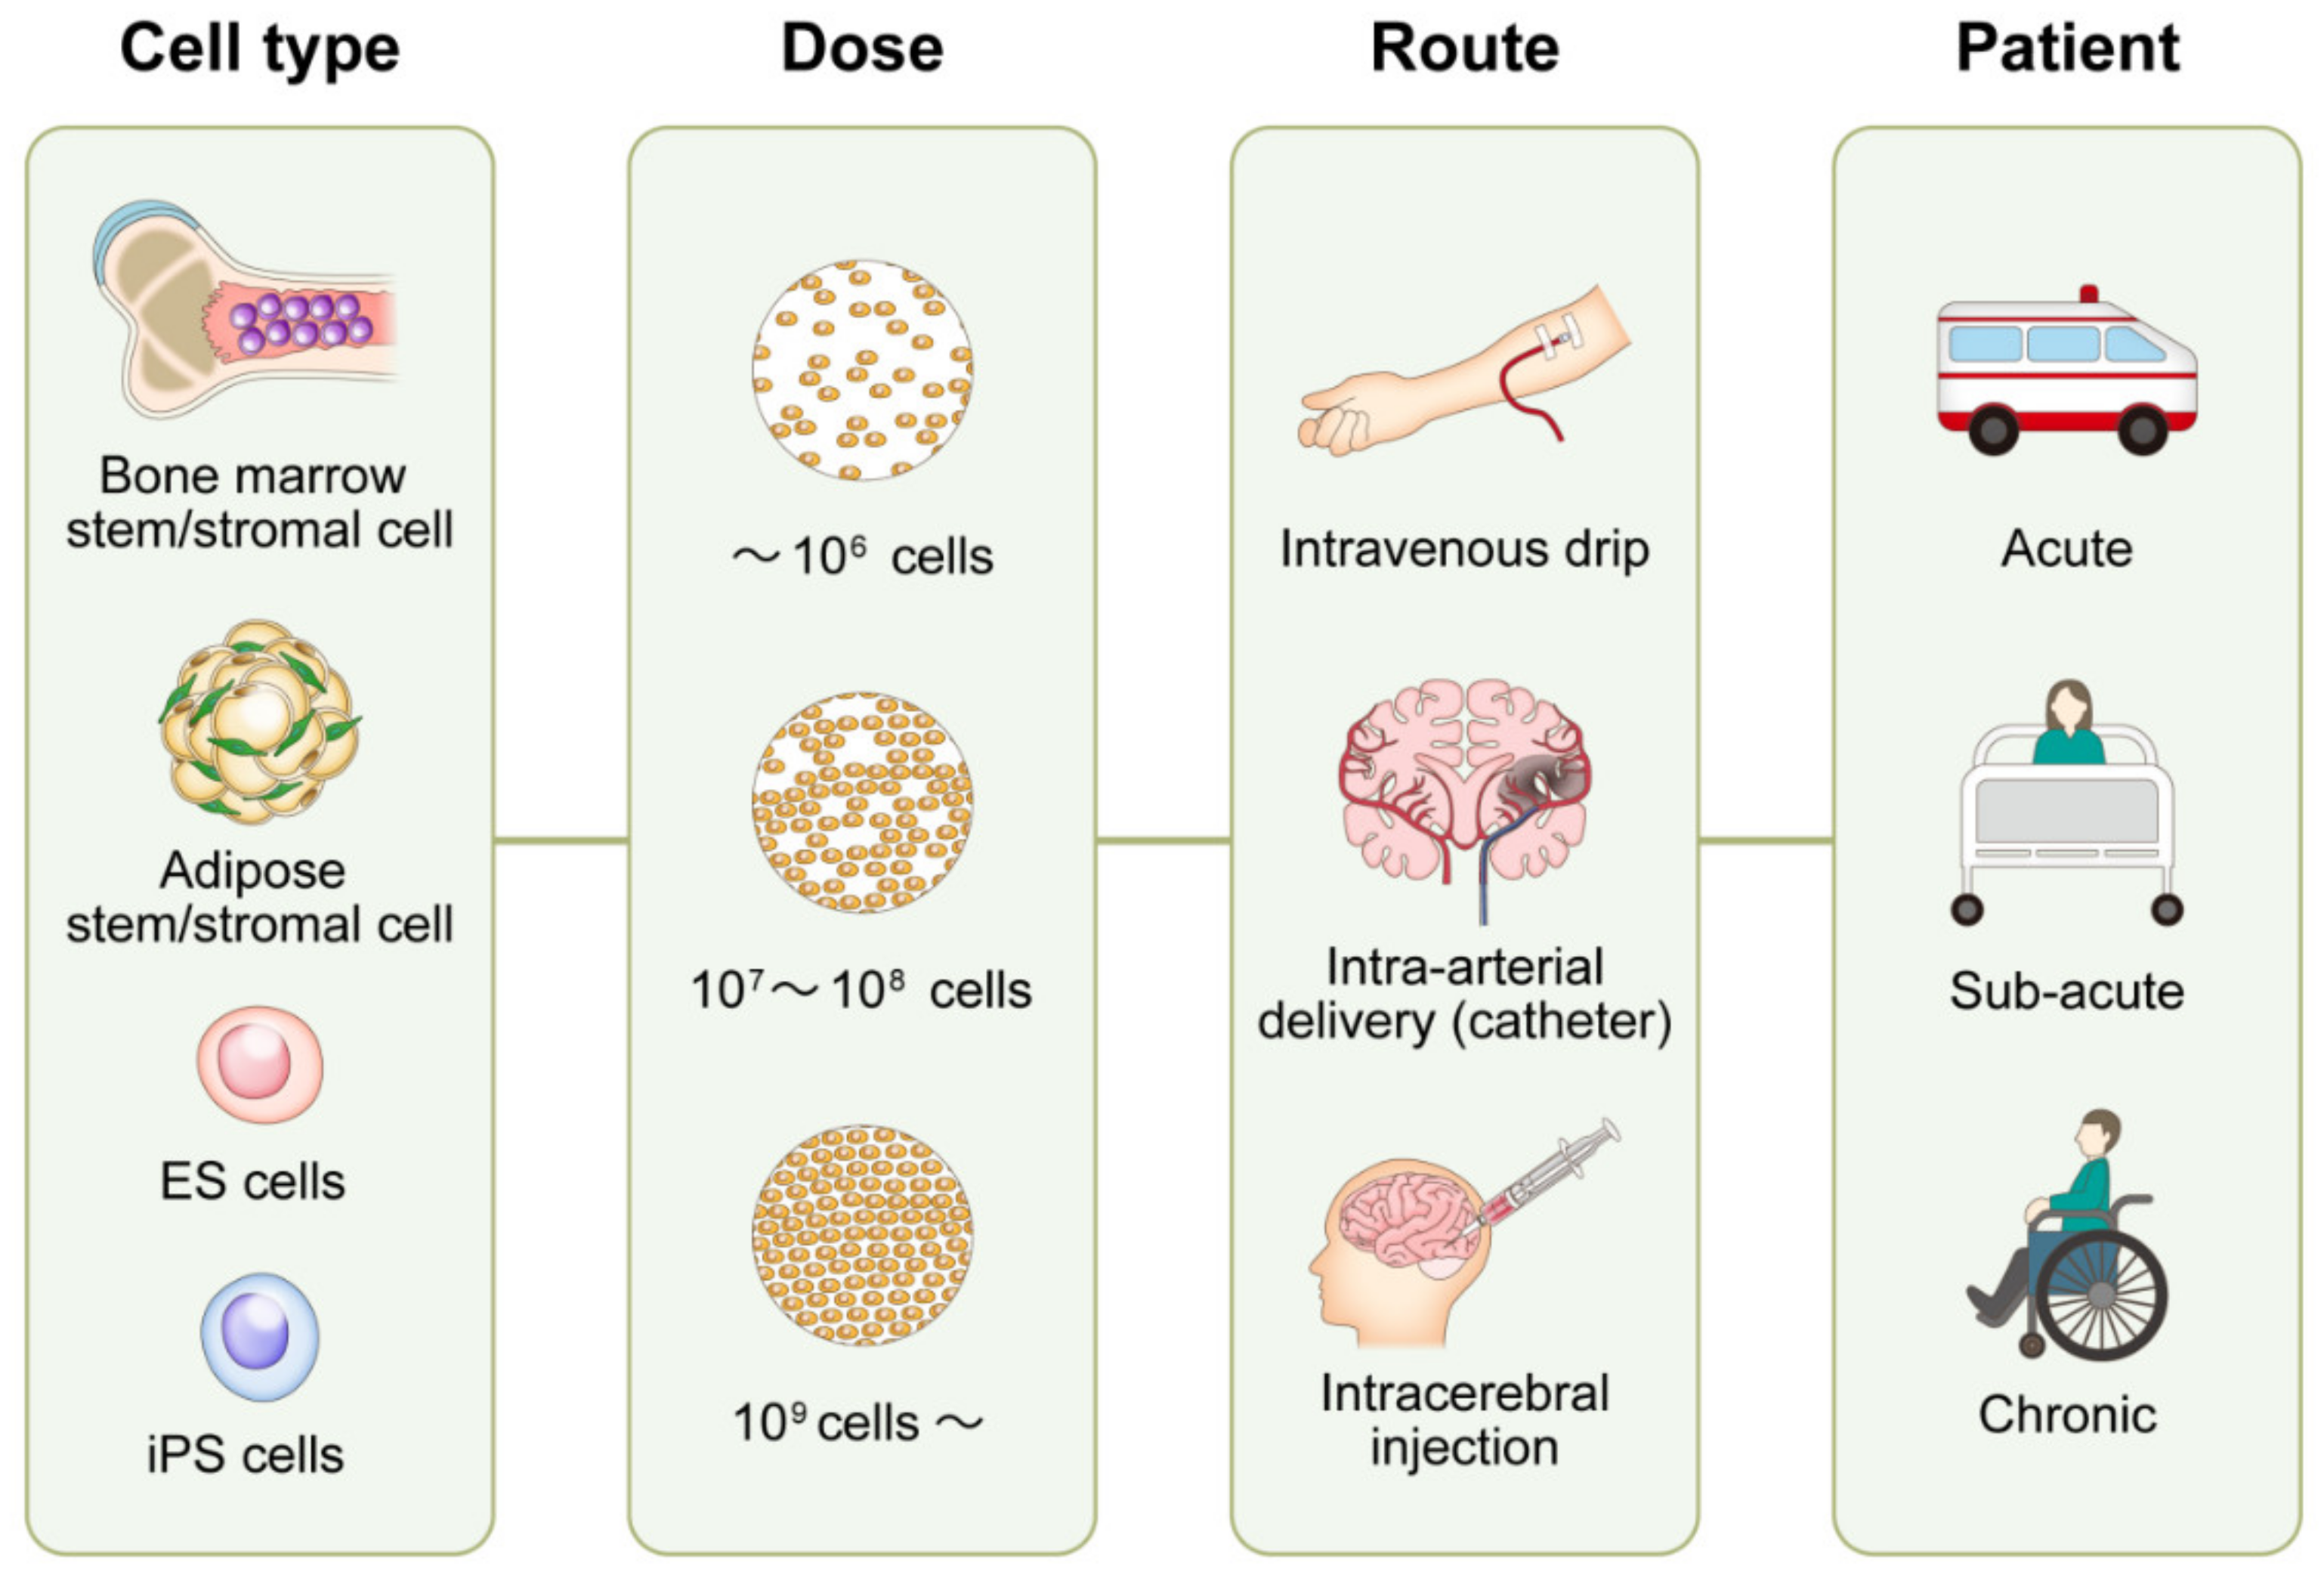 stem cell therapy research paper pdf